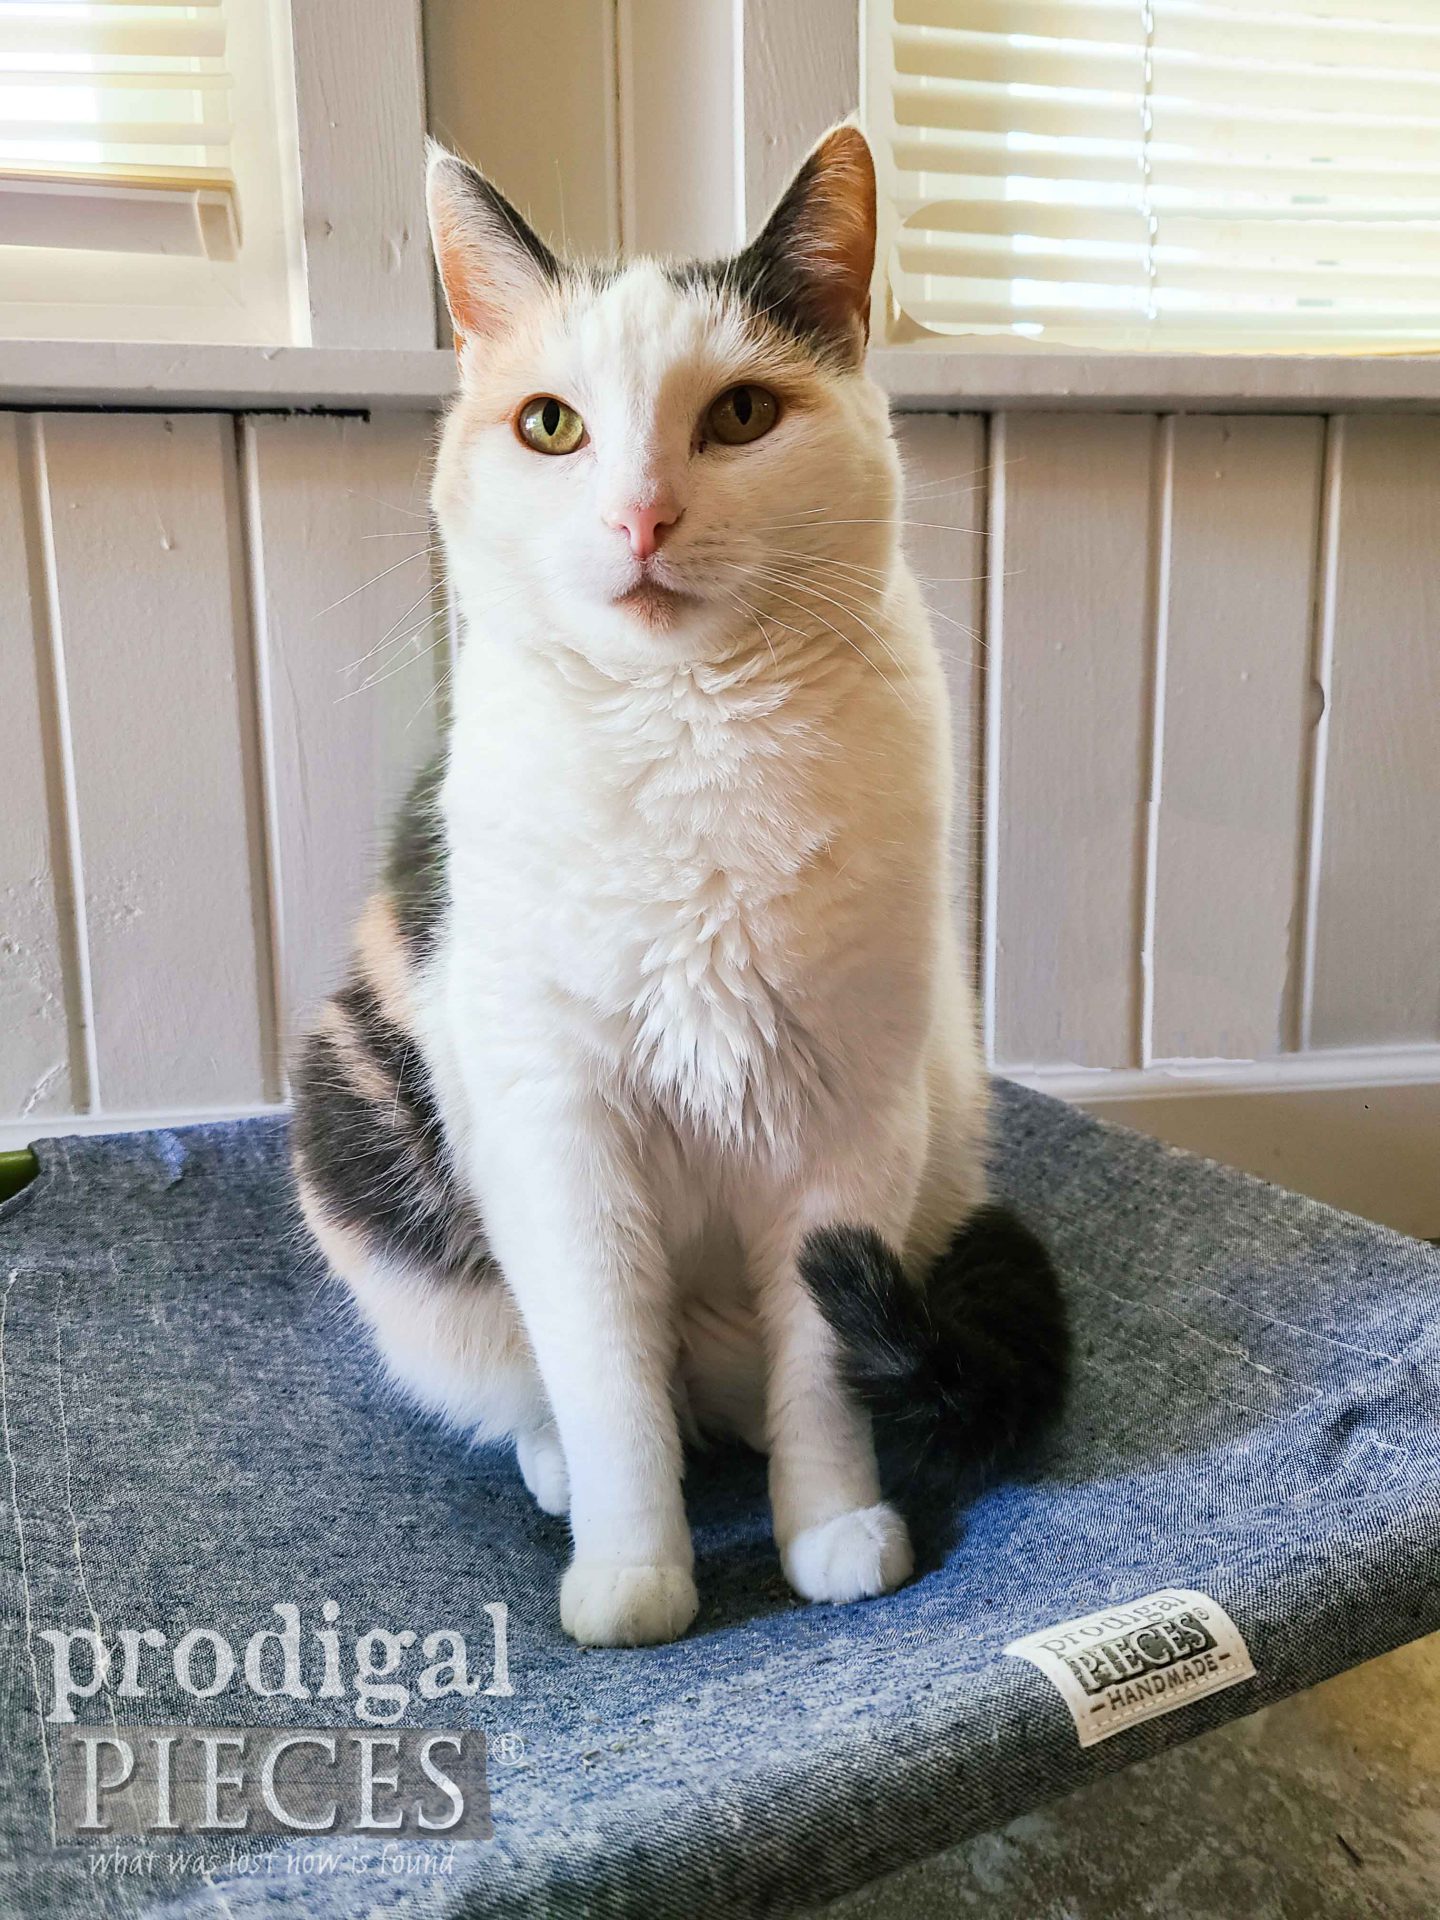 Pretty White Calico Kitty on DIY Cat Bed by Larissa of Prodigal Pieces | prodigalpieces.com #prodigalpieces #cat #bed #home